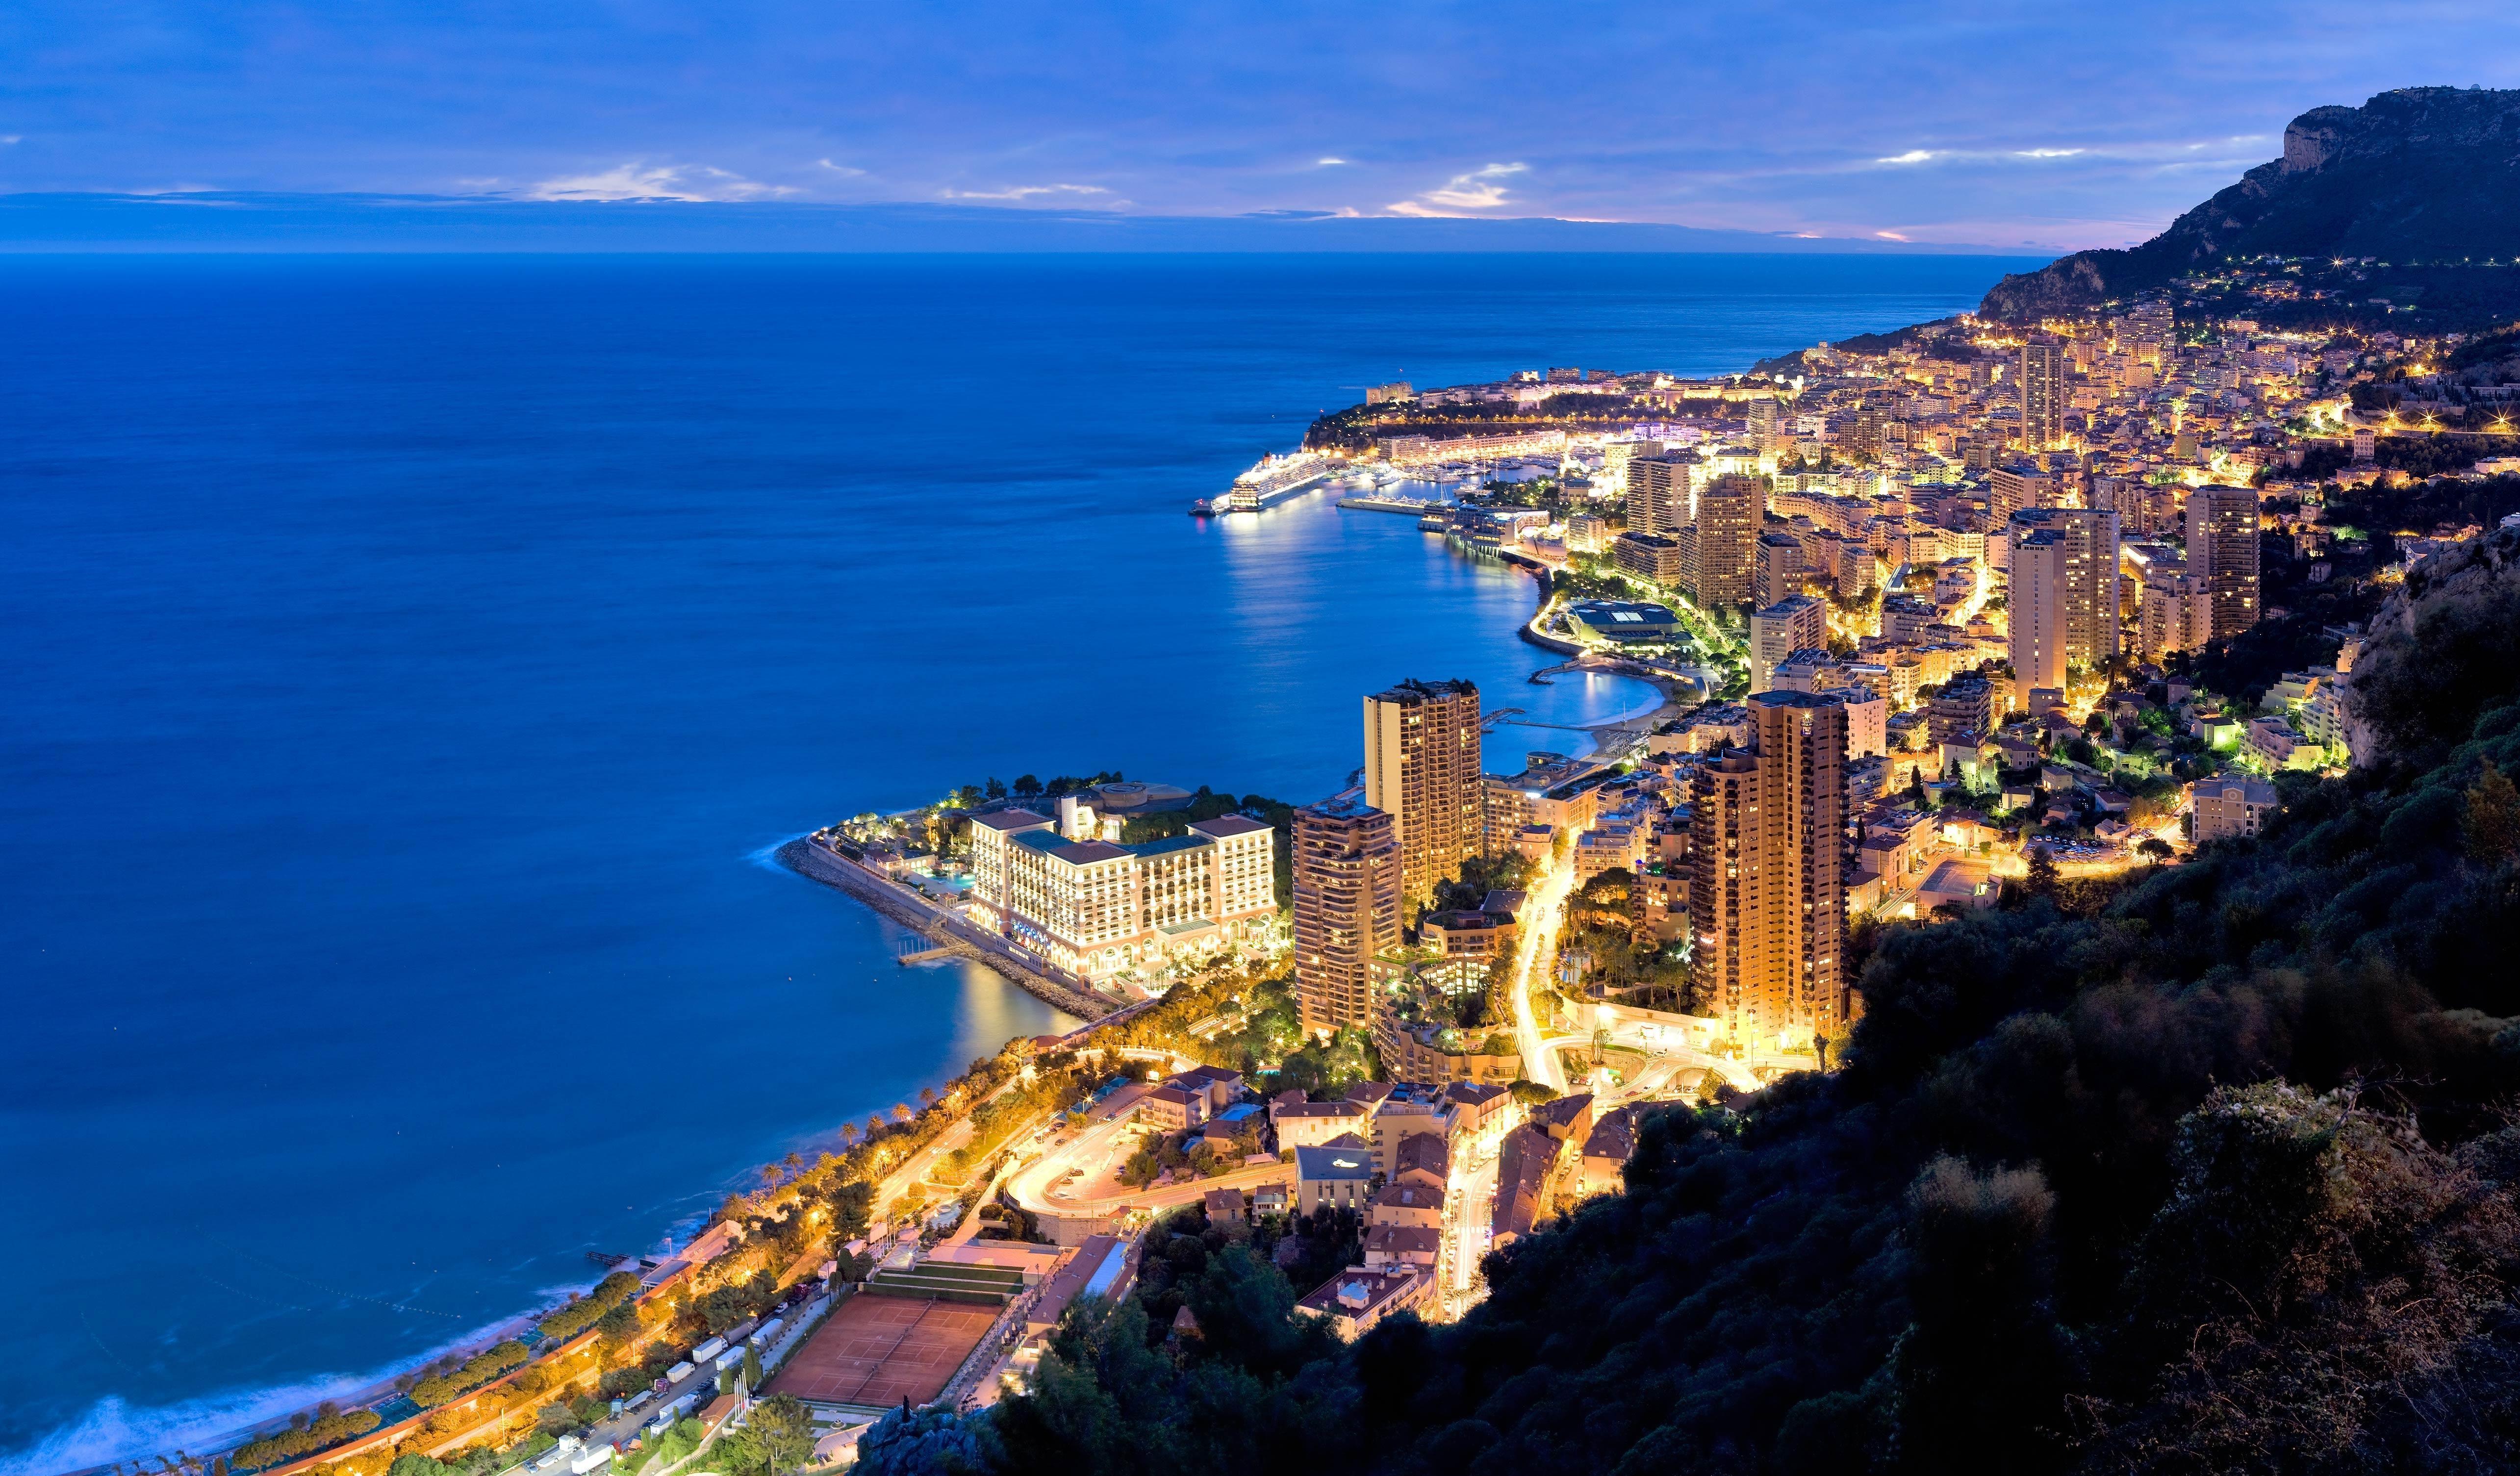 Monte Carlo France Wallpapers - Top Free Monte Carlo France Backgrounds ...